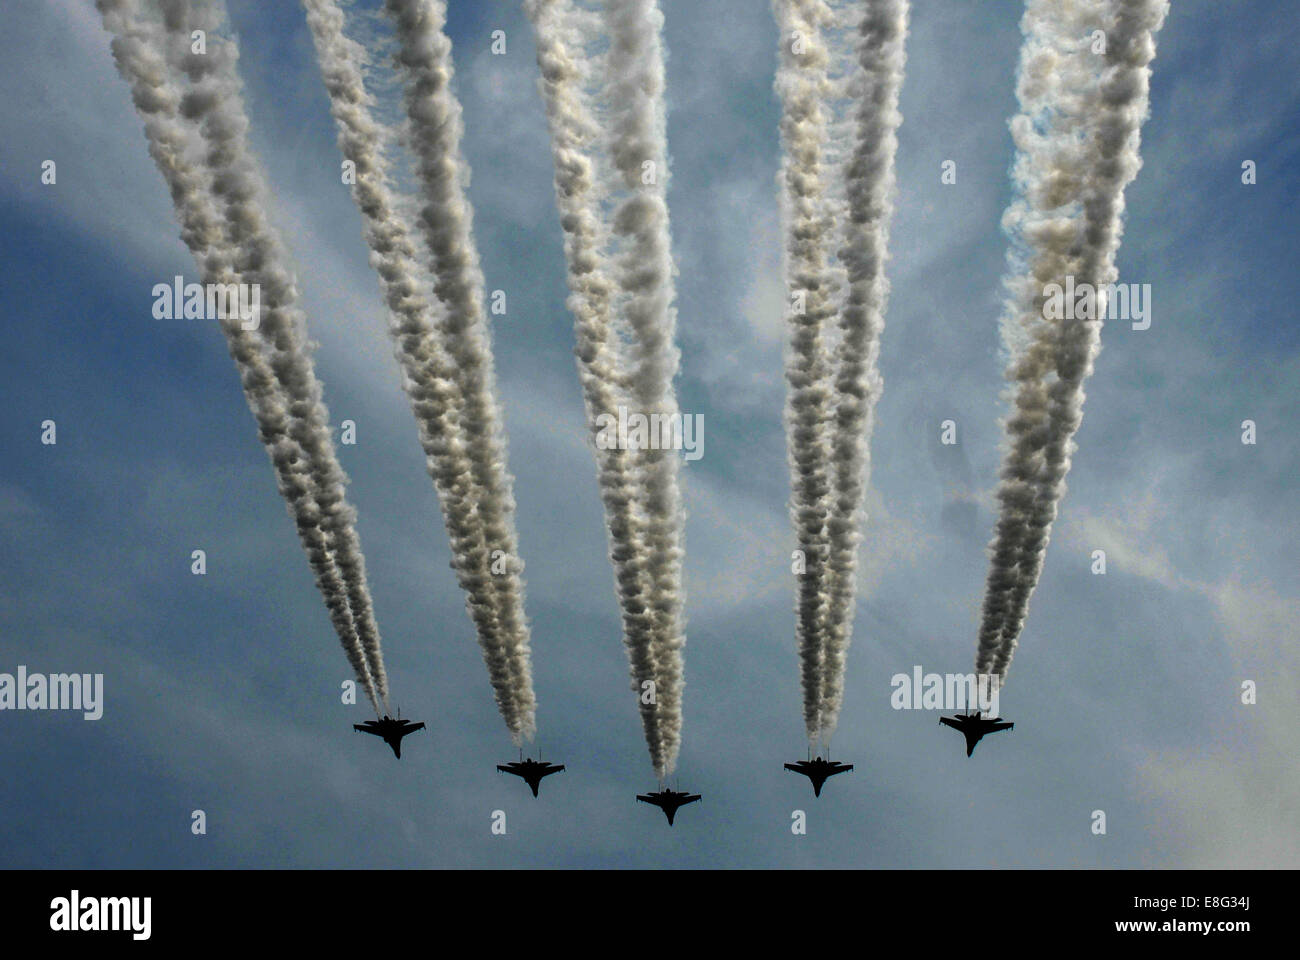 Surabaya, East Java. 7th Oct, 2014. Warplanes attend the celebration of the 69th anniversary of the Indonesian Armed Forces in Surabaya, East Java, Oct. 7, 2014. Credit:  Syaiful Arif/Xinhua/Alamy Live News Stock Photo